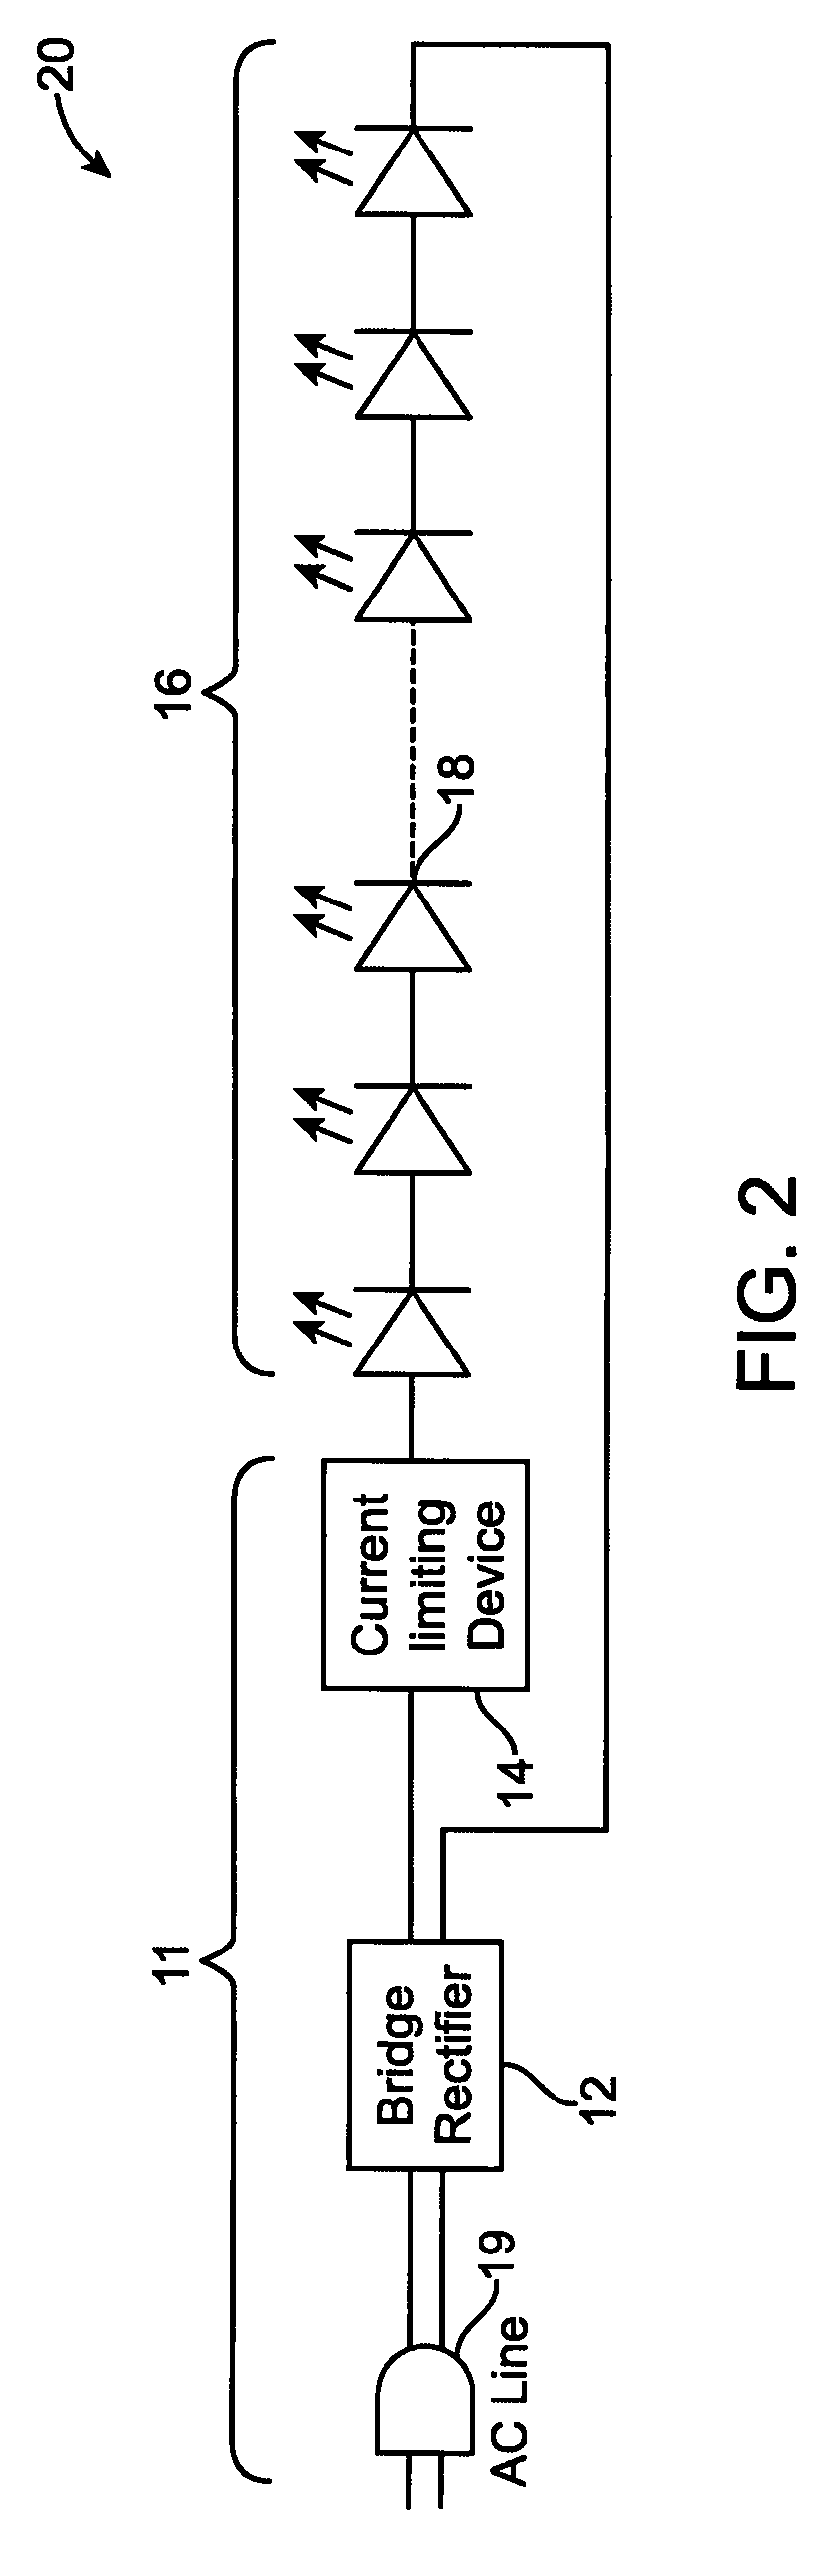 Solid state lighting apparatus